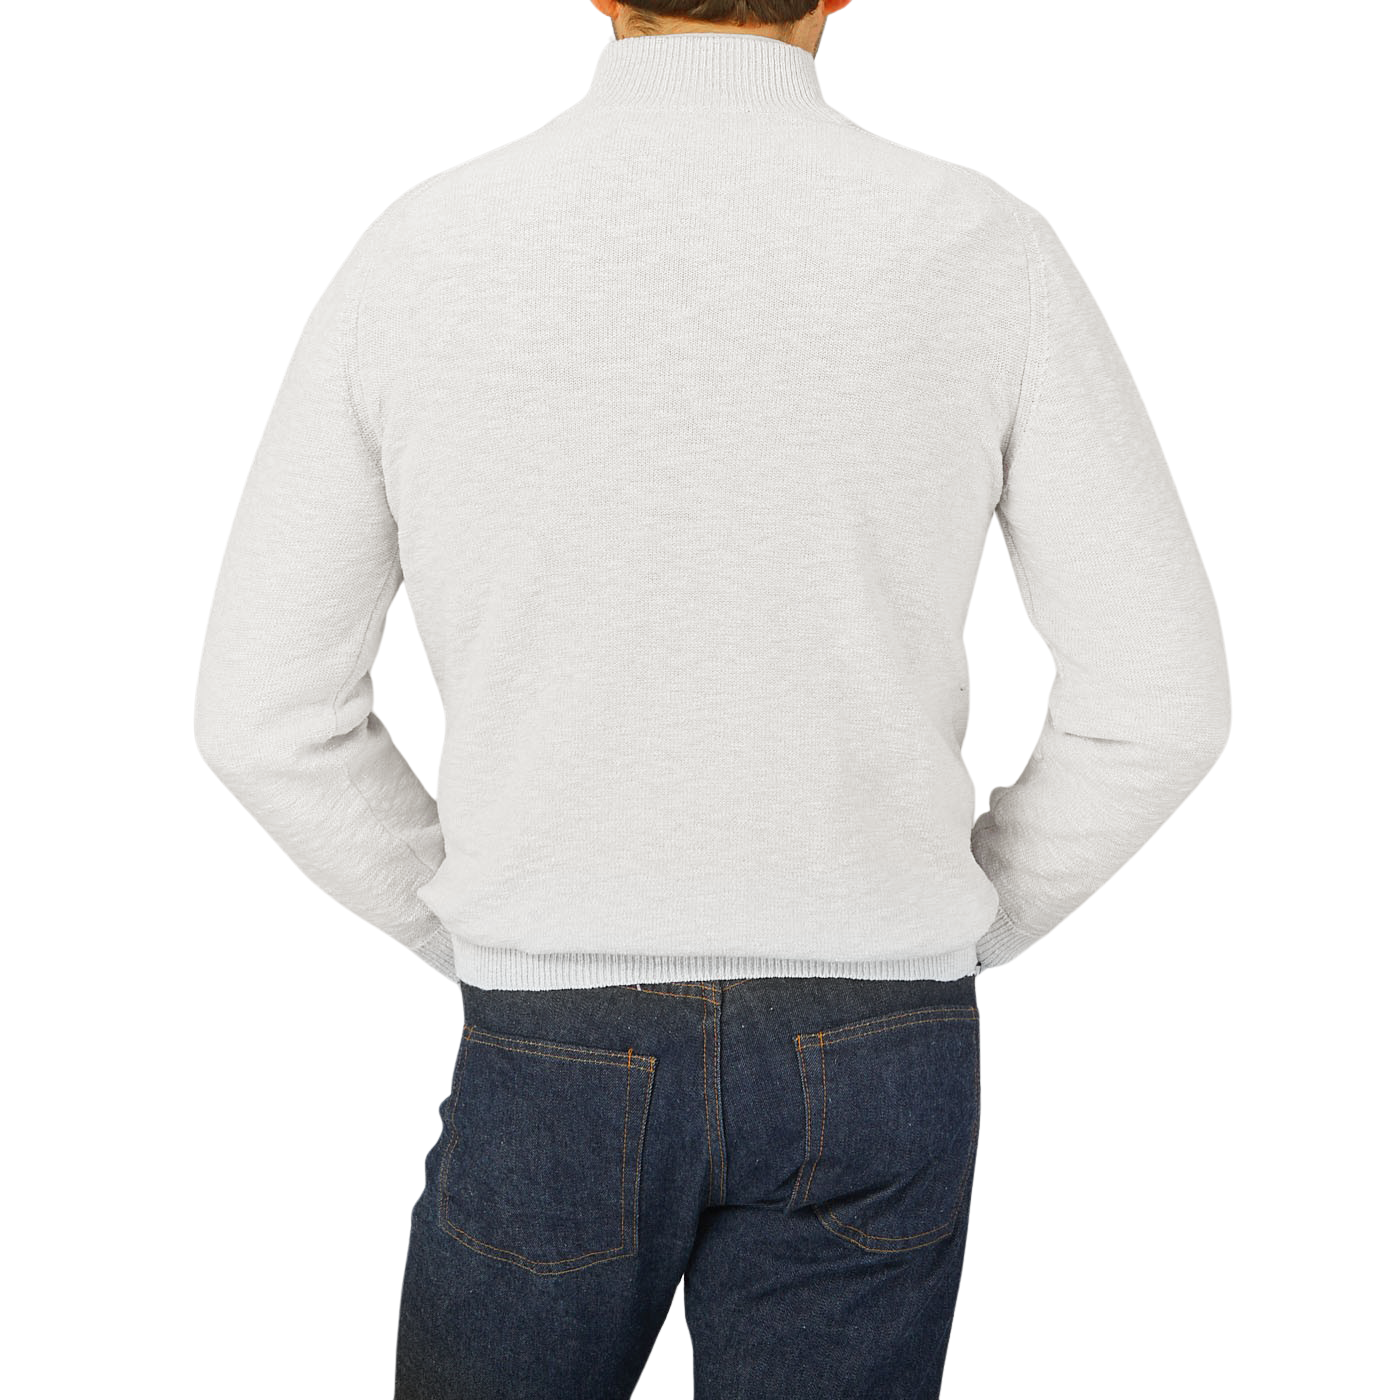 The back view of a man wearing jeans and a Maurizio Baldassari Cream White Cotton Mouline 1/4 Zip Sweater.